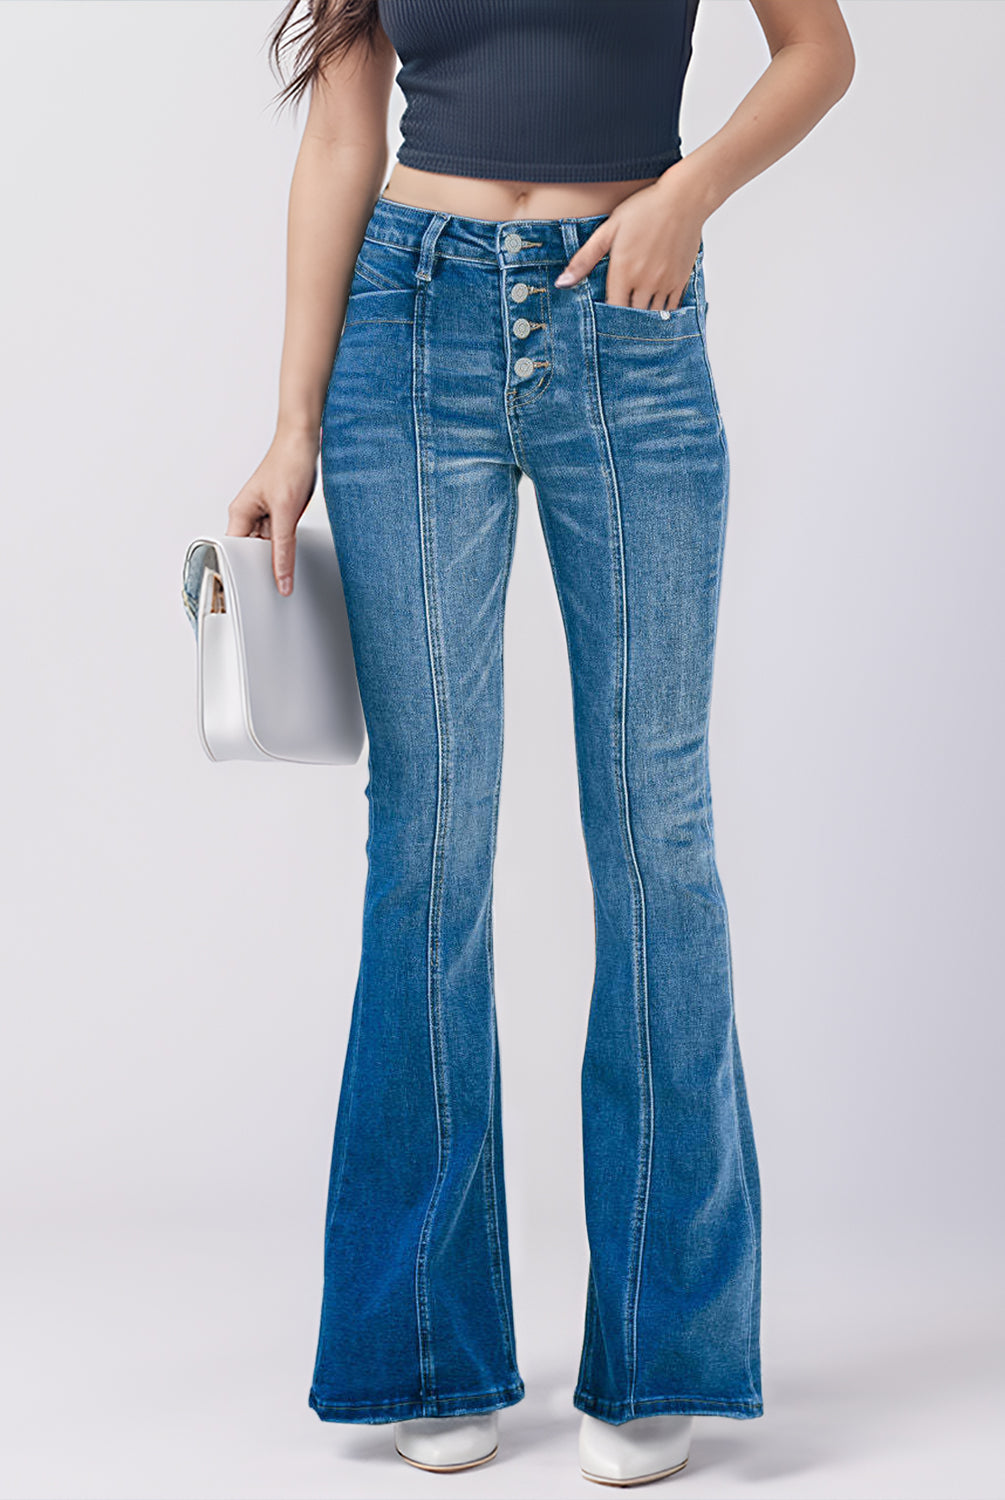 Trendsetting woman sporting high-waist bootcut denim jeans, ideal for a chic throwback look.